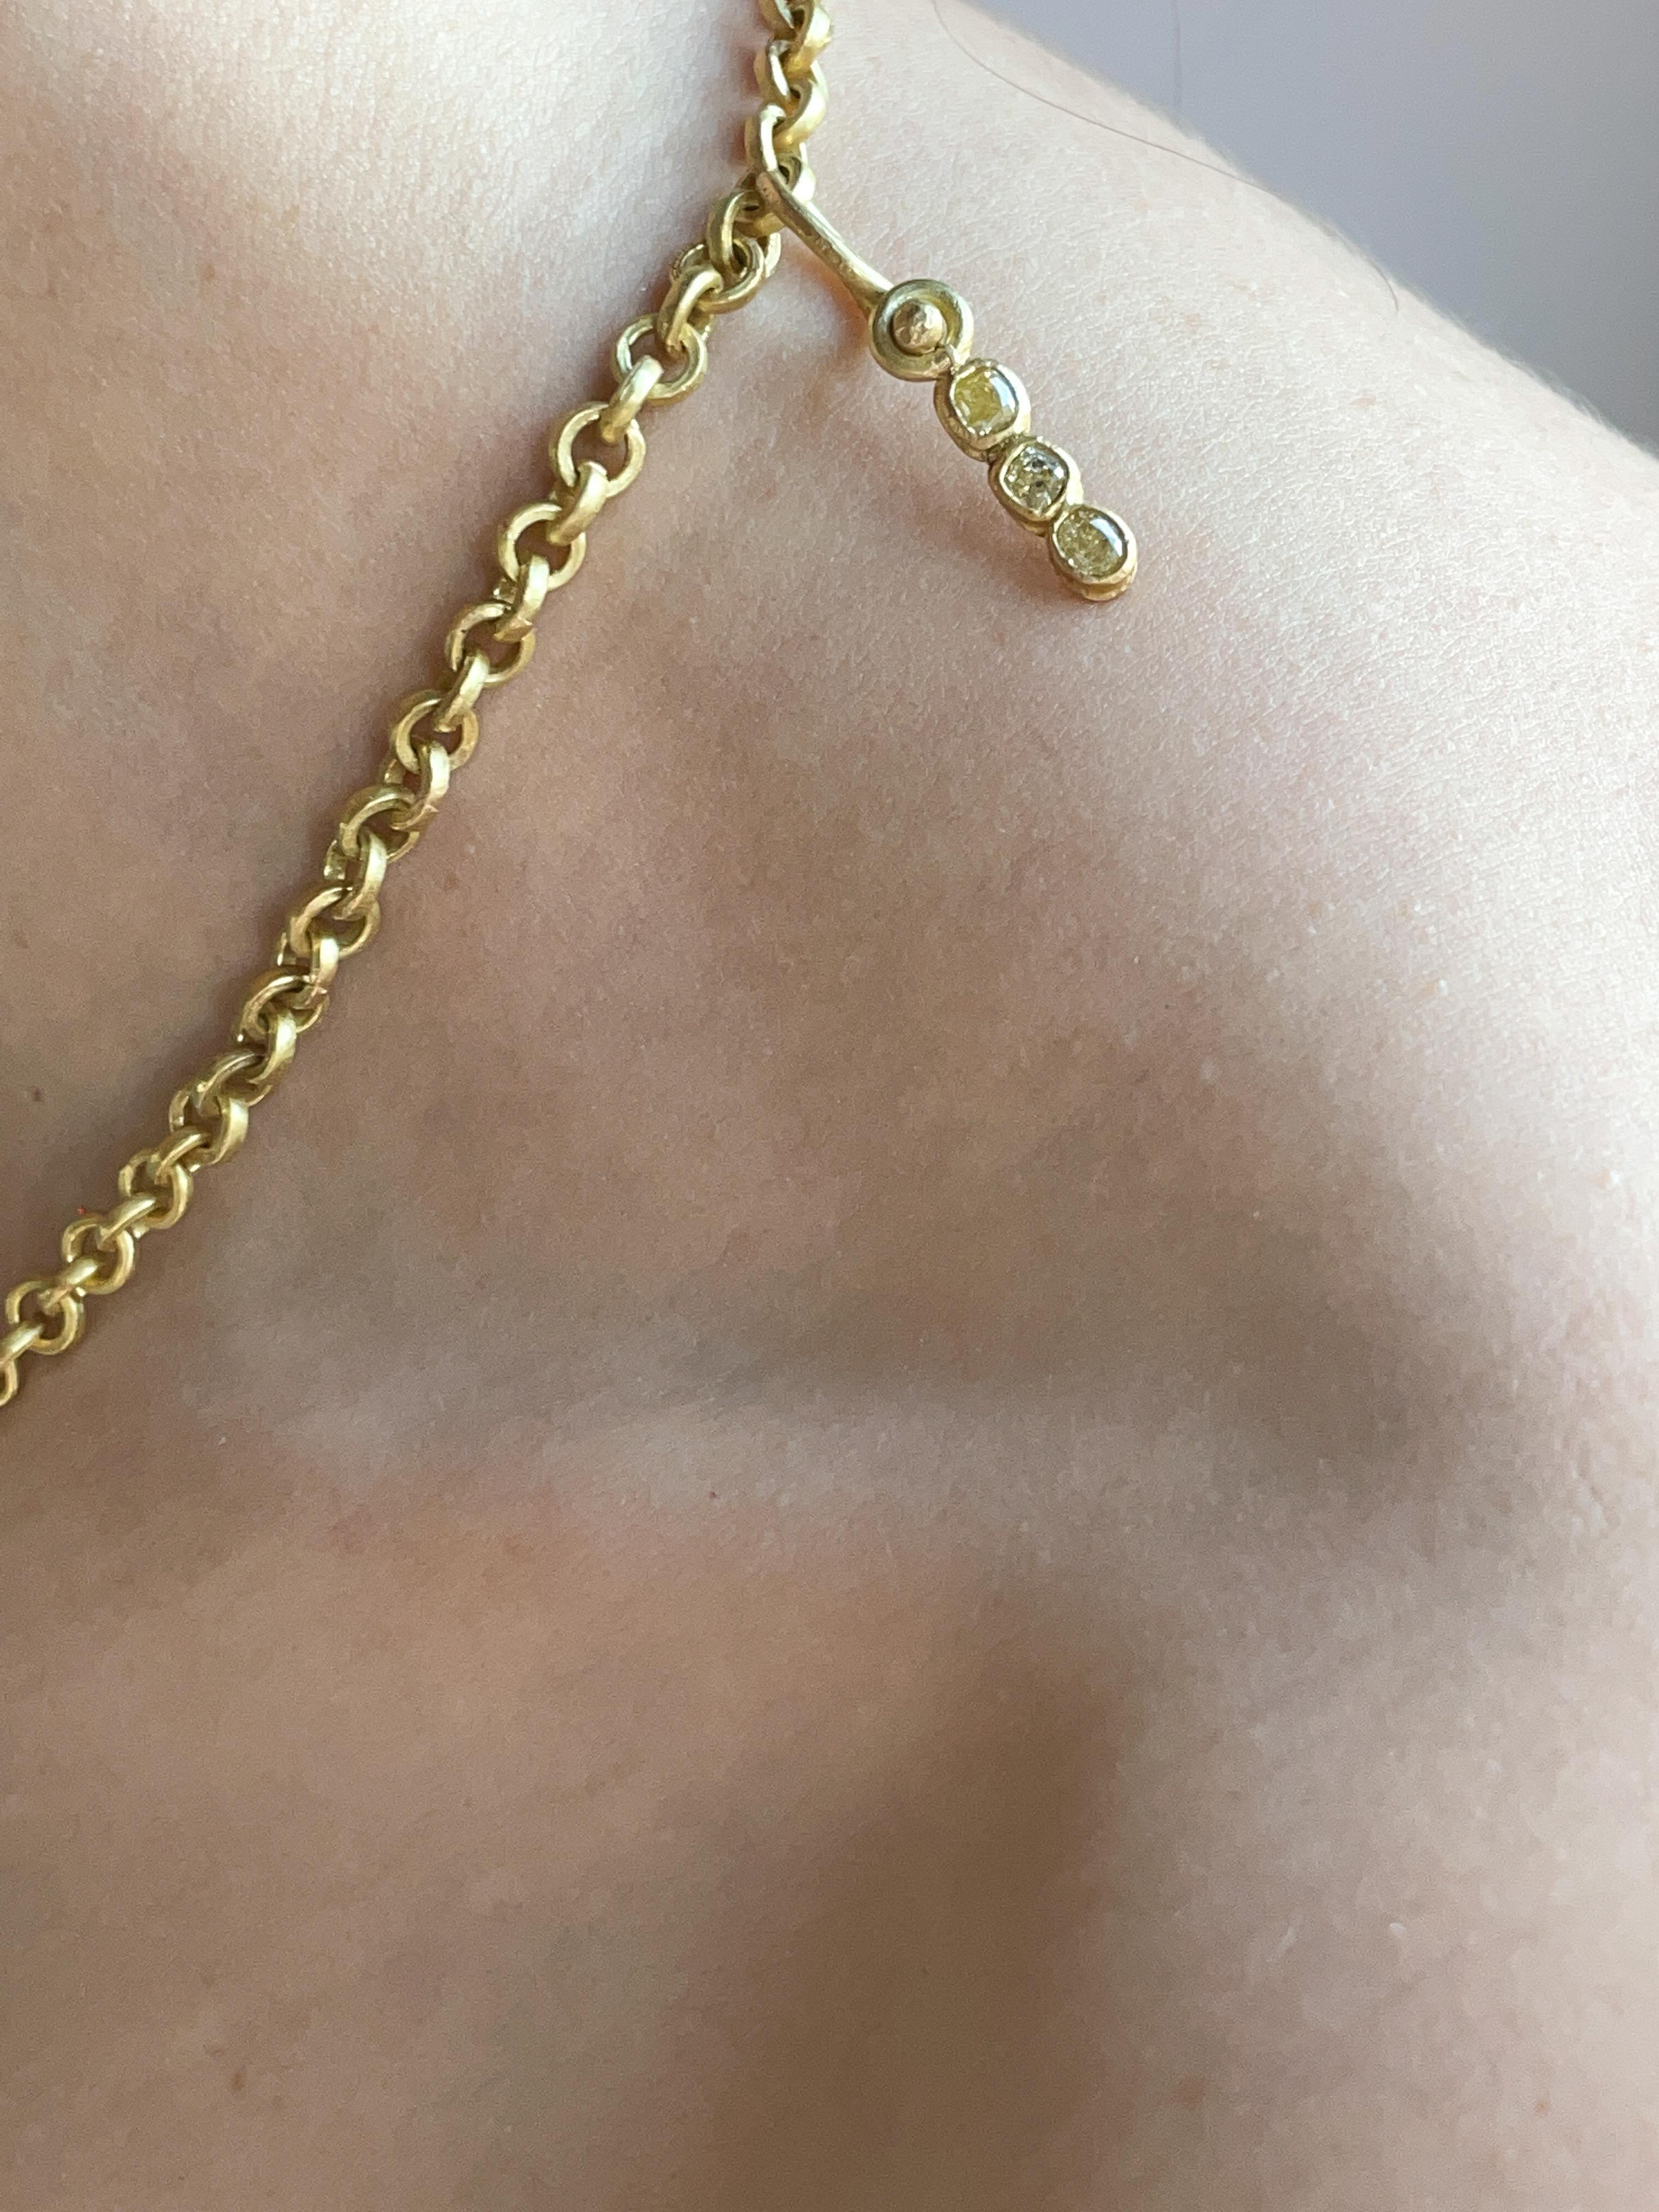 Modern 17mm Cream Pearl on 18K Gold Chain Necklace Diamond Enhancer and Toggle Clasp For Sale